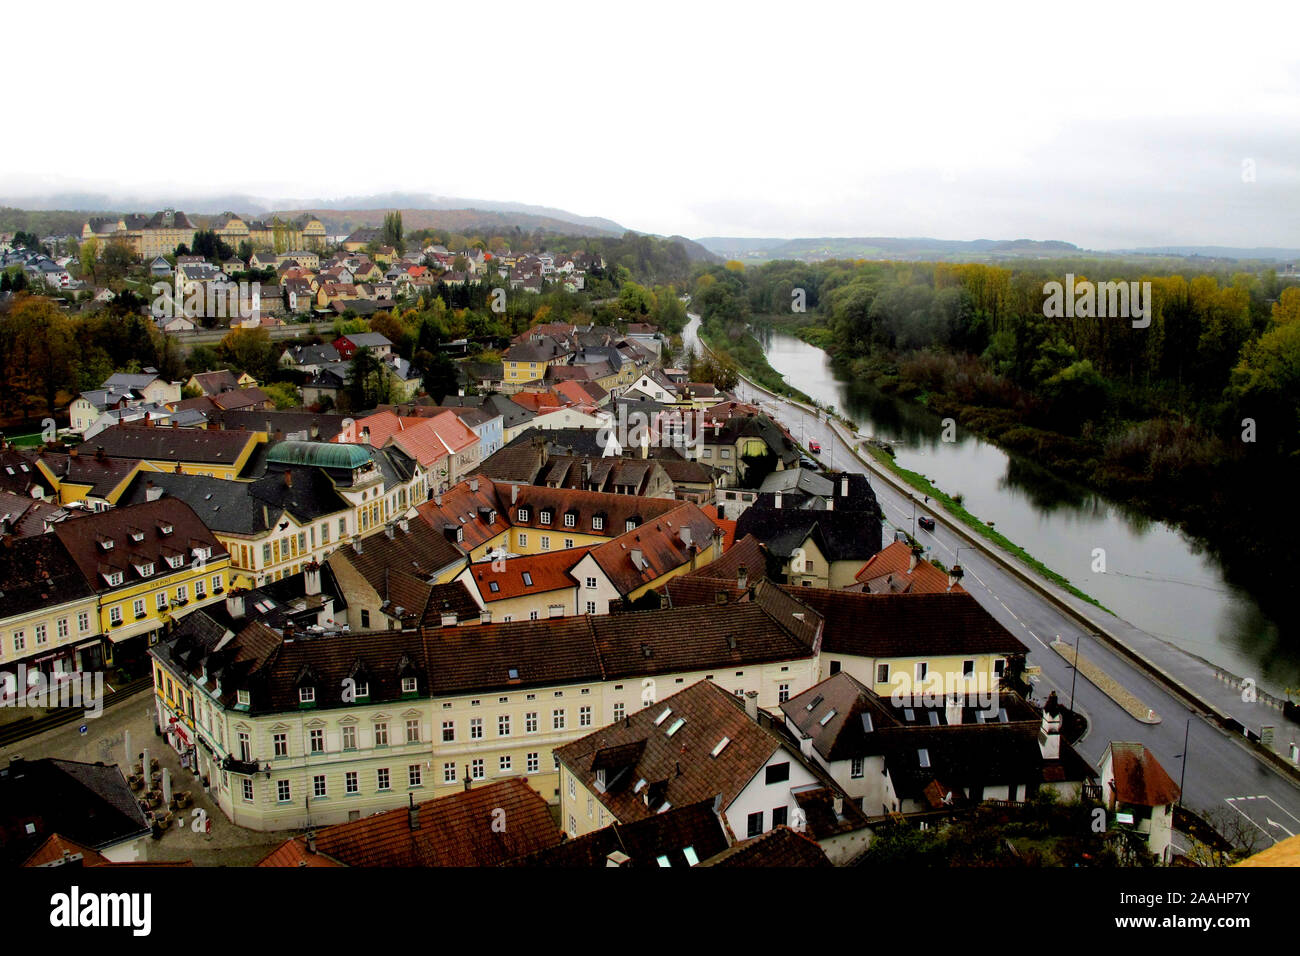 A view over Melk town and the river Danube from the grounds of Melk Abbey. Stock Photo